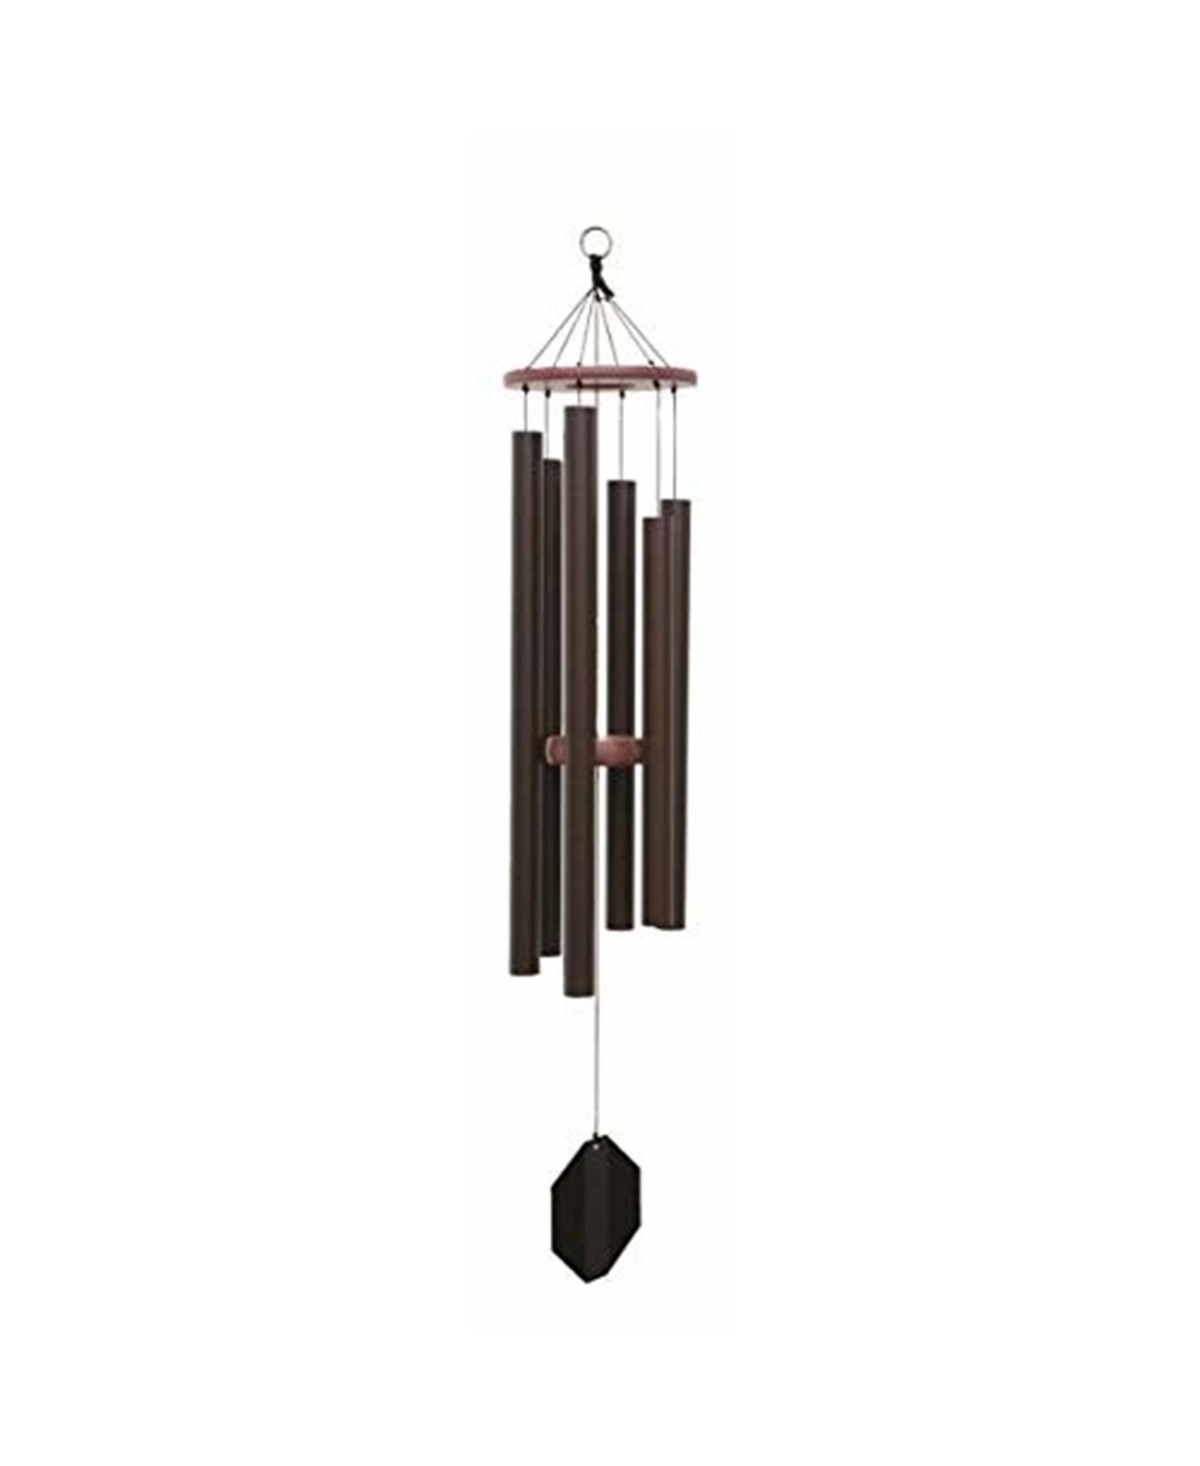 Lambright Country Amish Crafted Wind Chime, King David's Harp - Brown